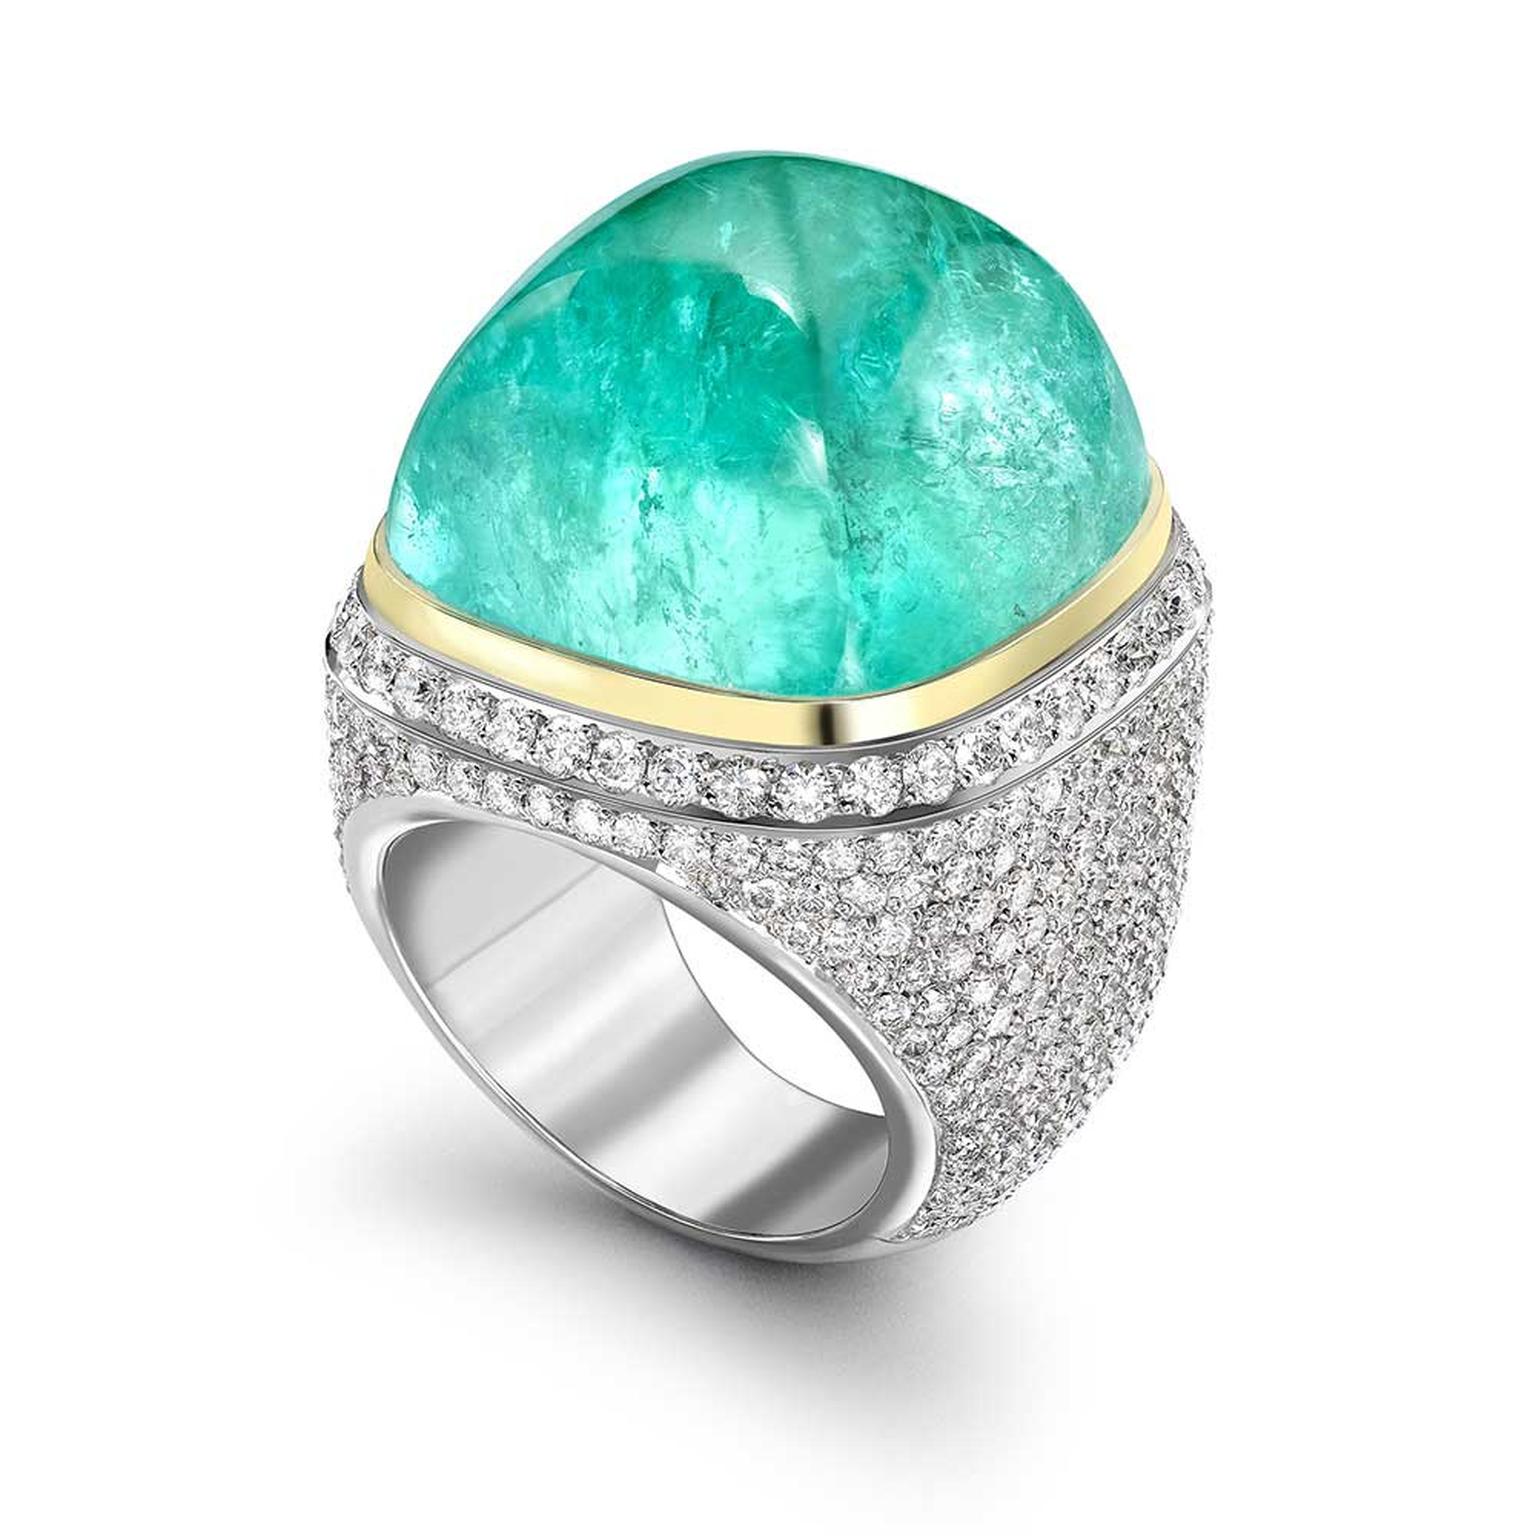 Theo Fennell Mozambique ring in white gold, set with a 61.94ct African Paraiba tourmaline and diamonds.